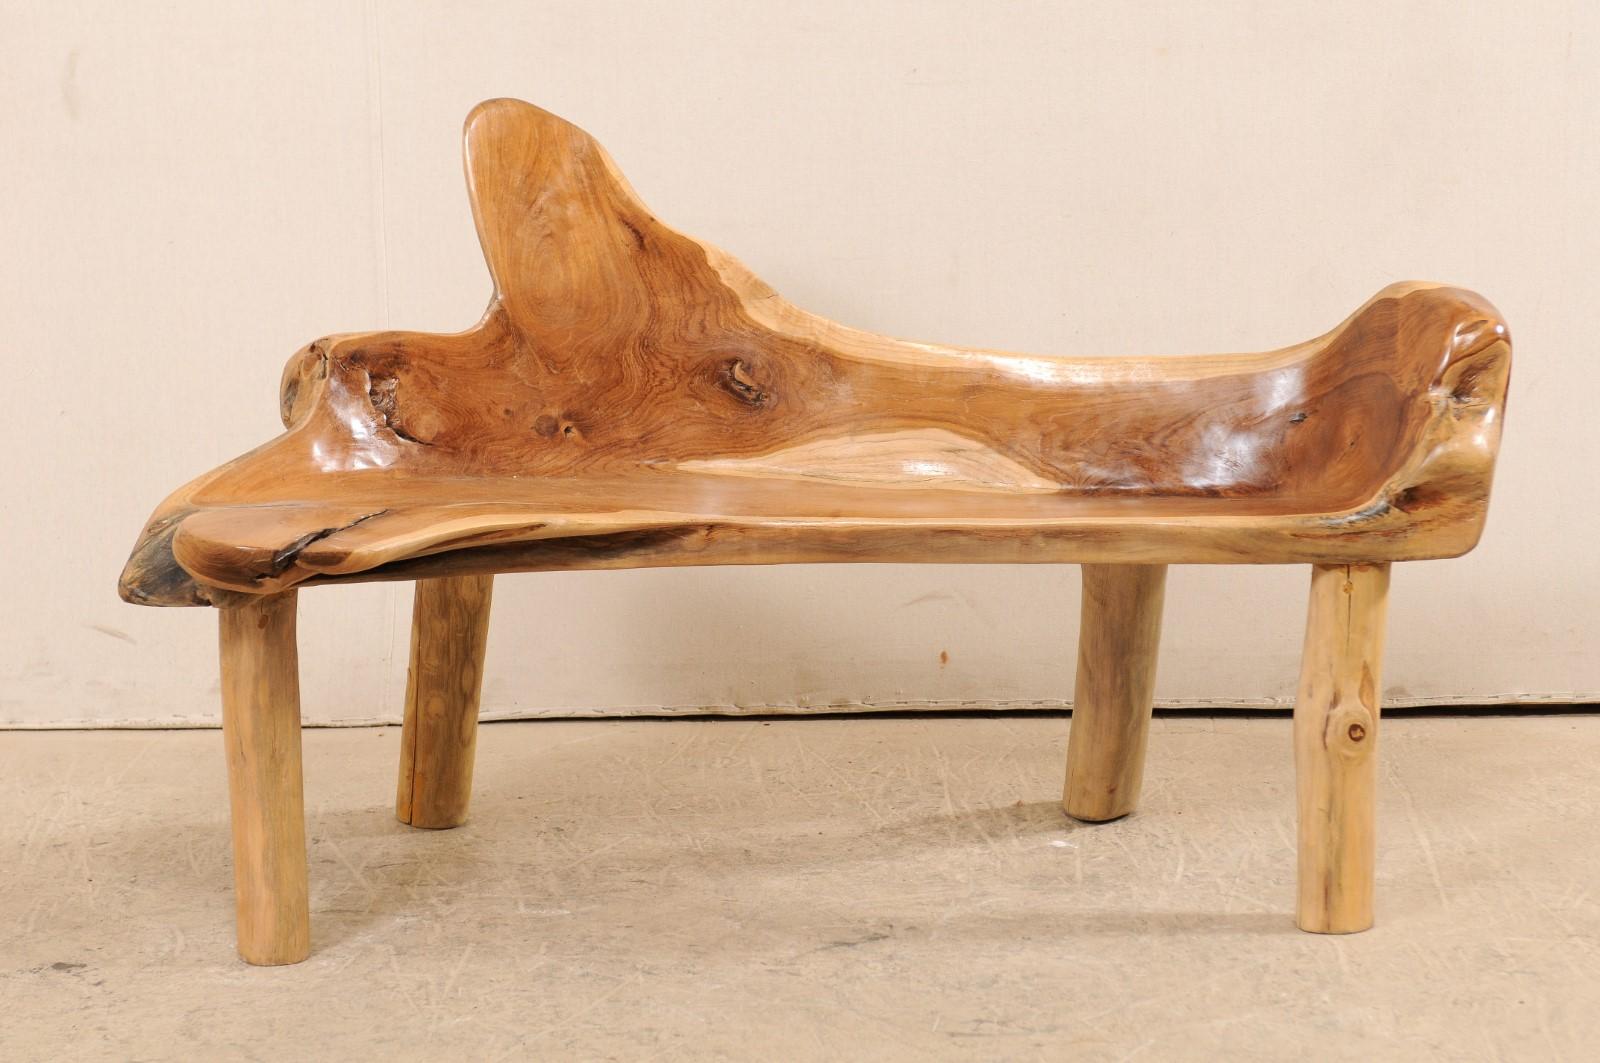 A natural teak wood bench with live edges. This delightful bench, approximately 4.5 feet in length, has been created from the root and limbs of Indonesian teak wood, which has been smoothed and polished. Teak is a tropical hardwood which is